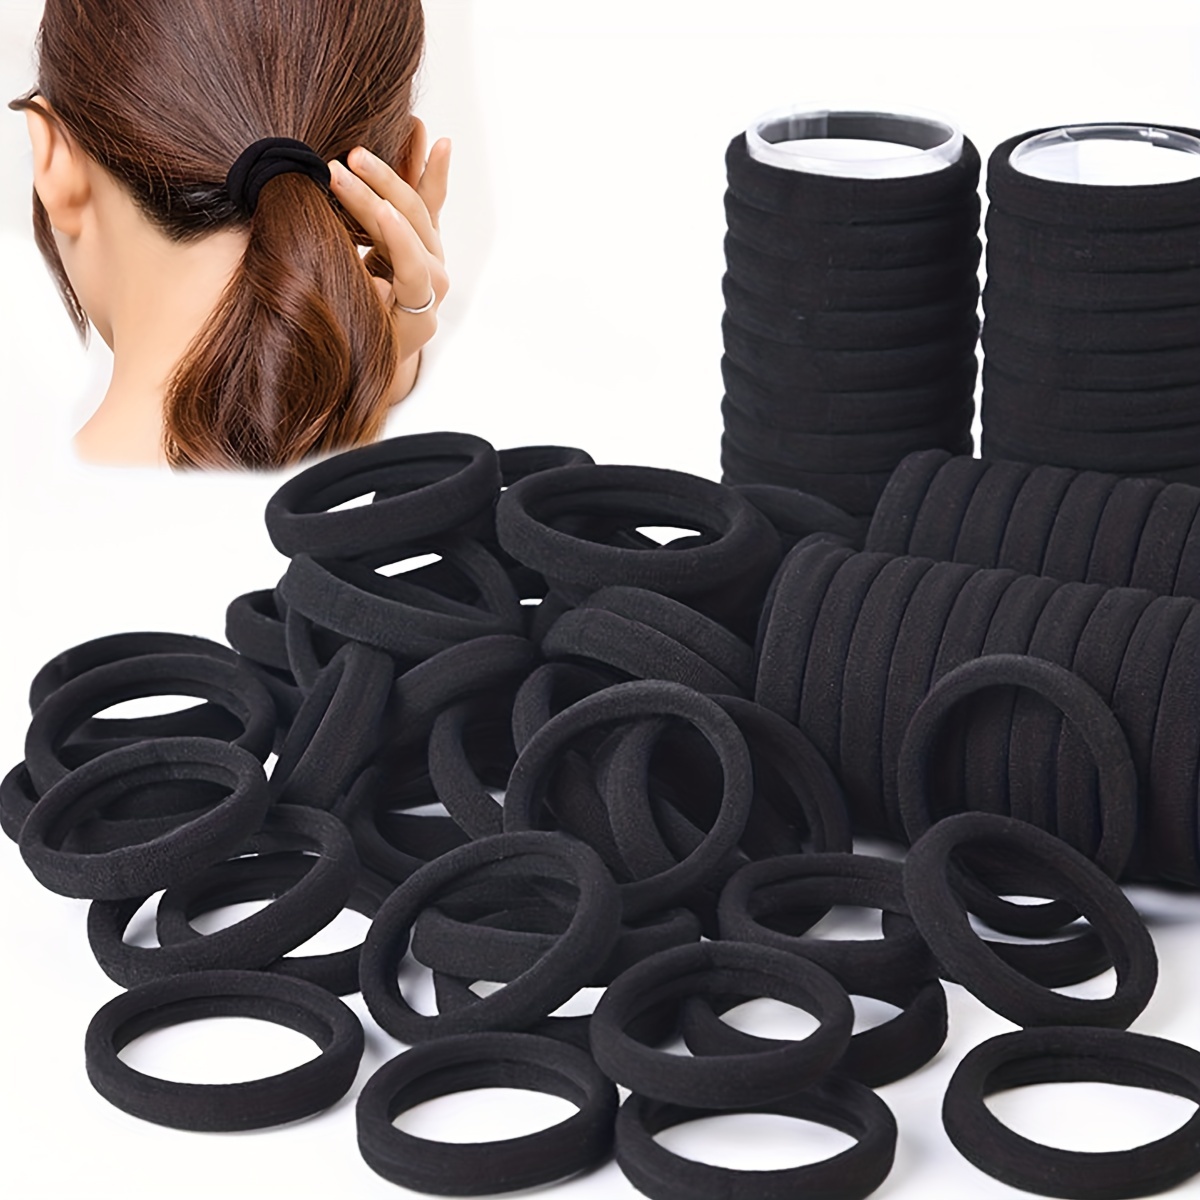 3/4” Inches Black Hair Rubber Bands for Hair Ties Small Elastics Bands  Large Hair Braiding Ponytail Holders for Baby Toddler Girls Kids Thick Hair